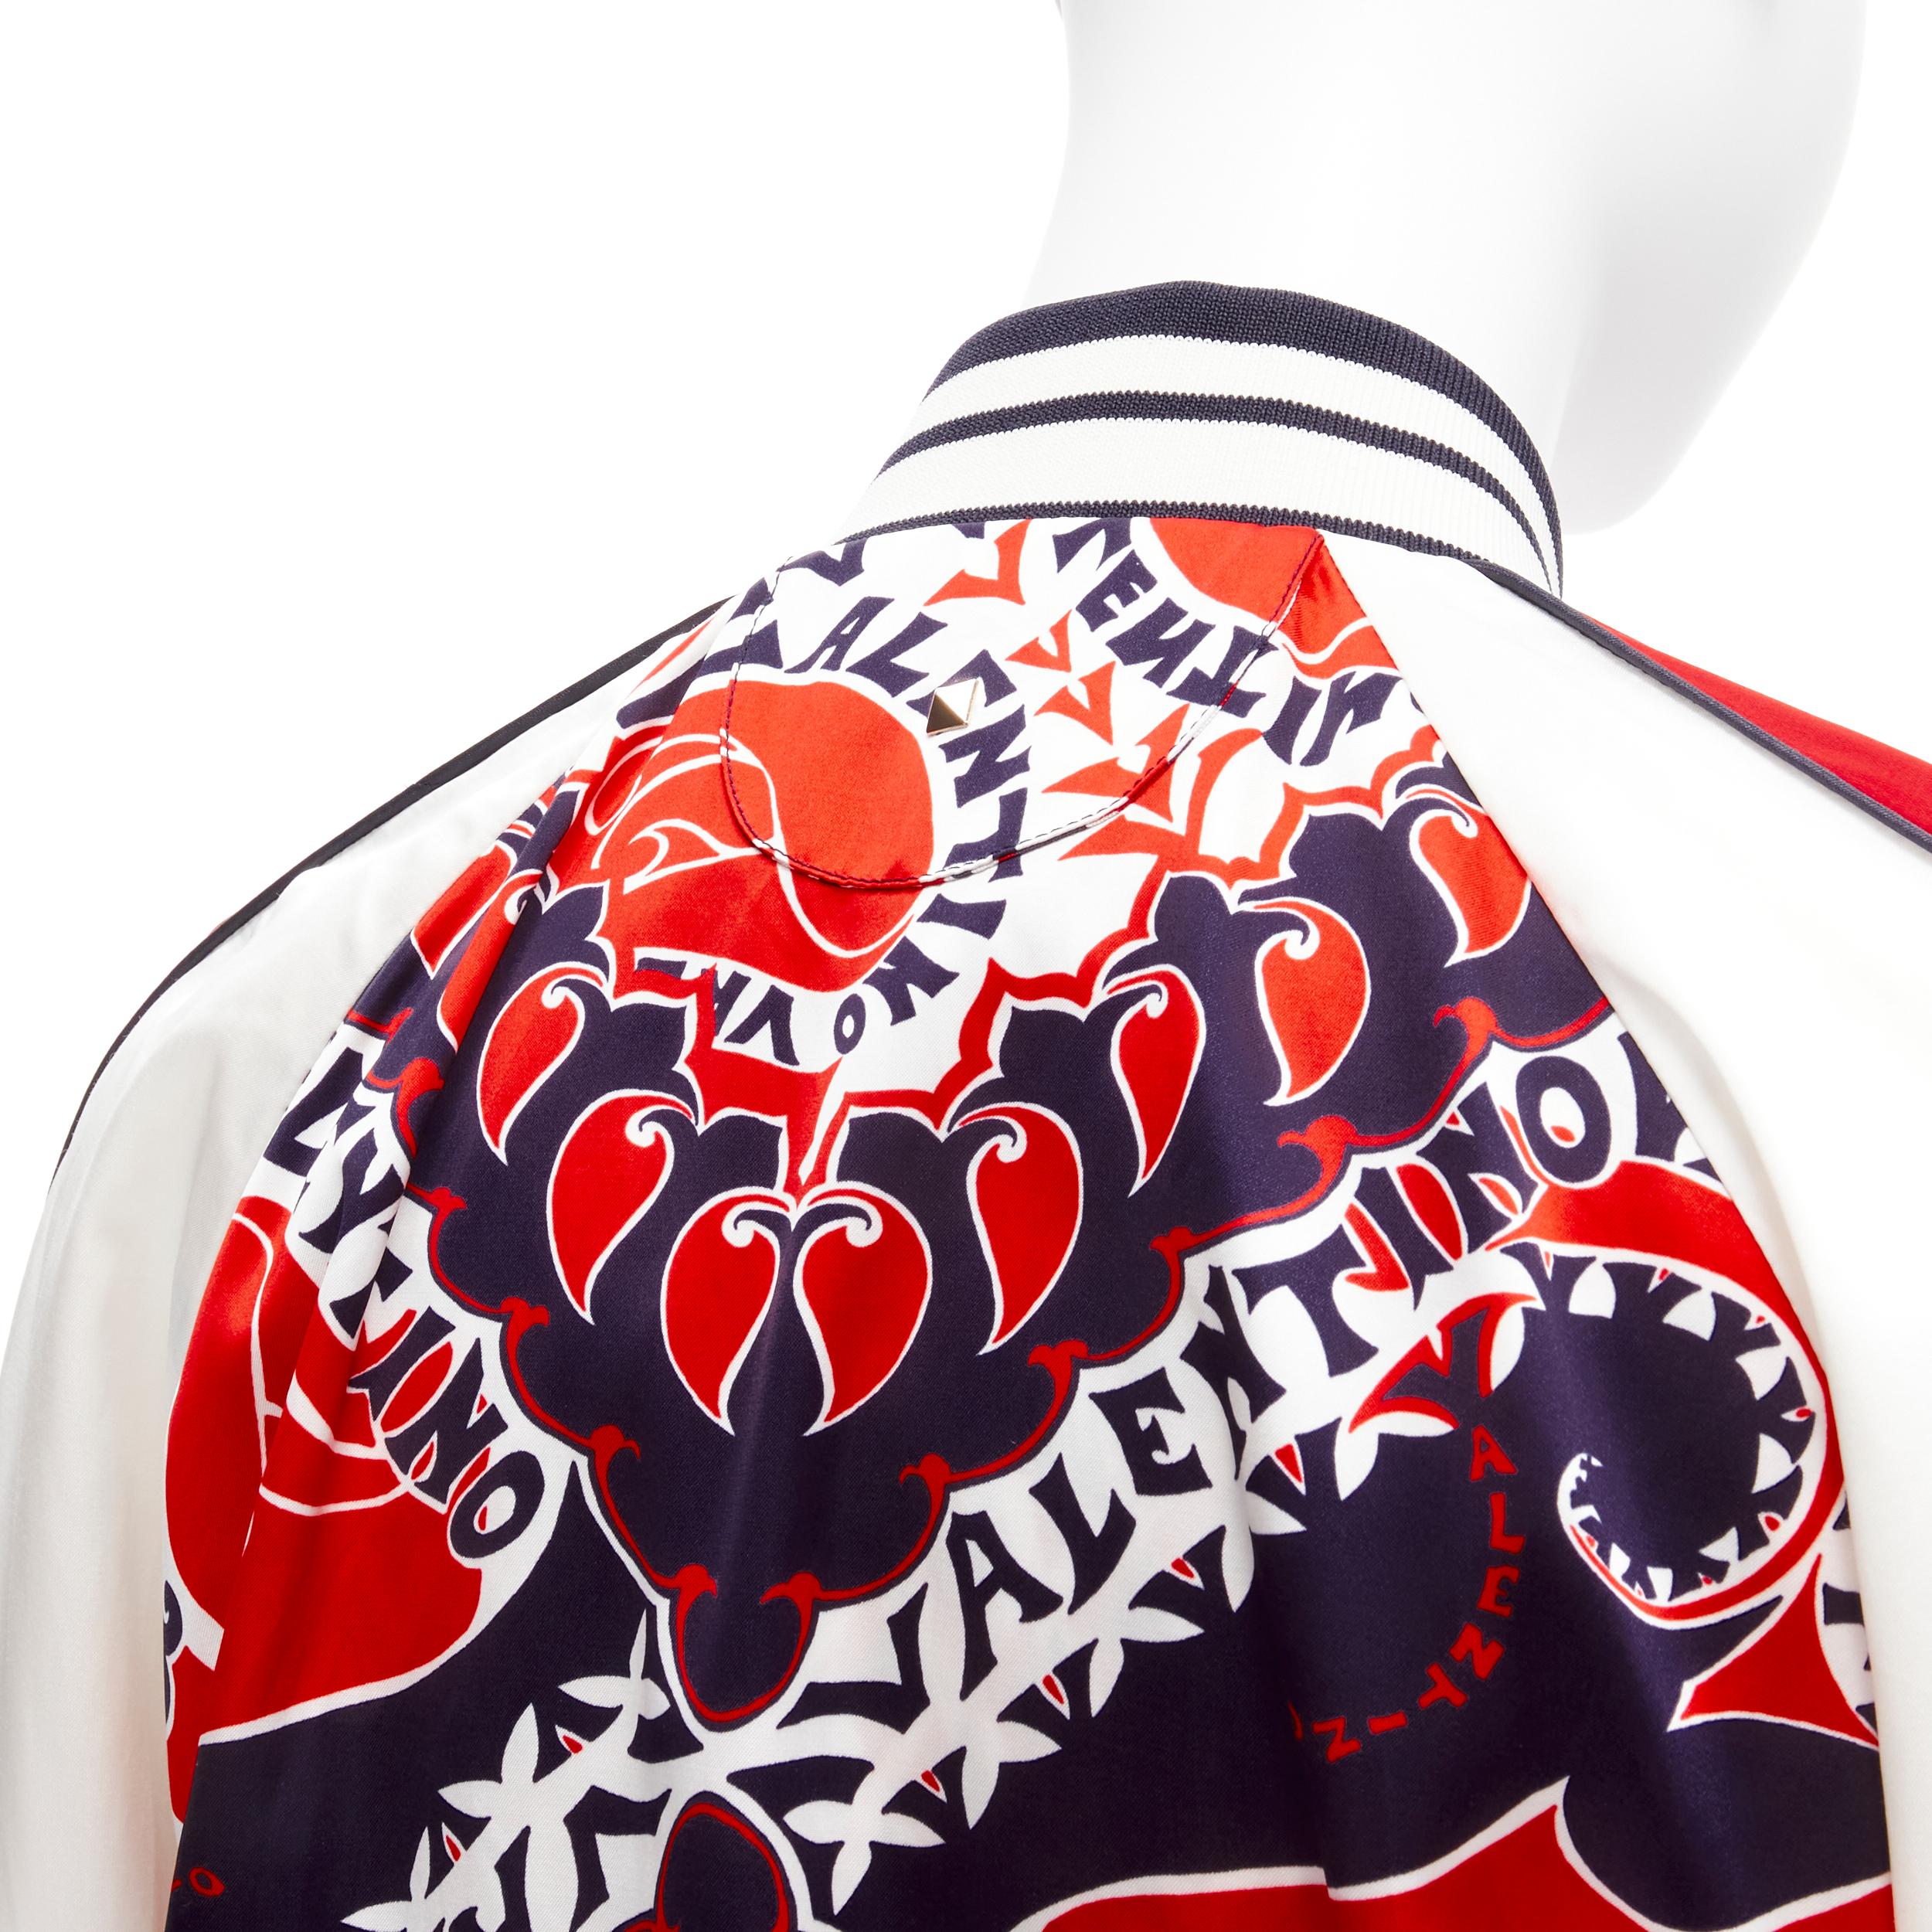 VALENTINO 2022 Manifesto Heart Bandana red blue satin bomber jacket IT40 S
Reference: AAWC/A00489
Brand: Valentino
Designer: Pier Paolo Piccioli
Collection: 2022
Material: Viscose, Cotton
Color: Red, Blue
Pattern: Abstract
Closure: Button
Lining: